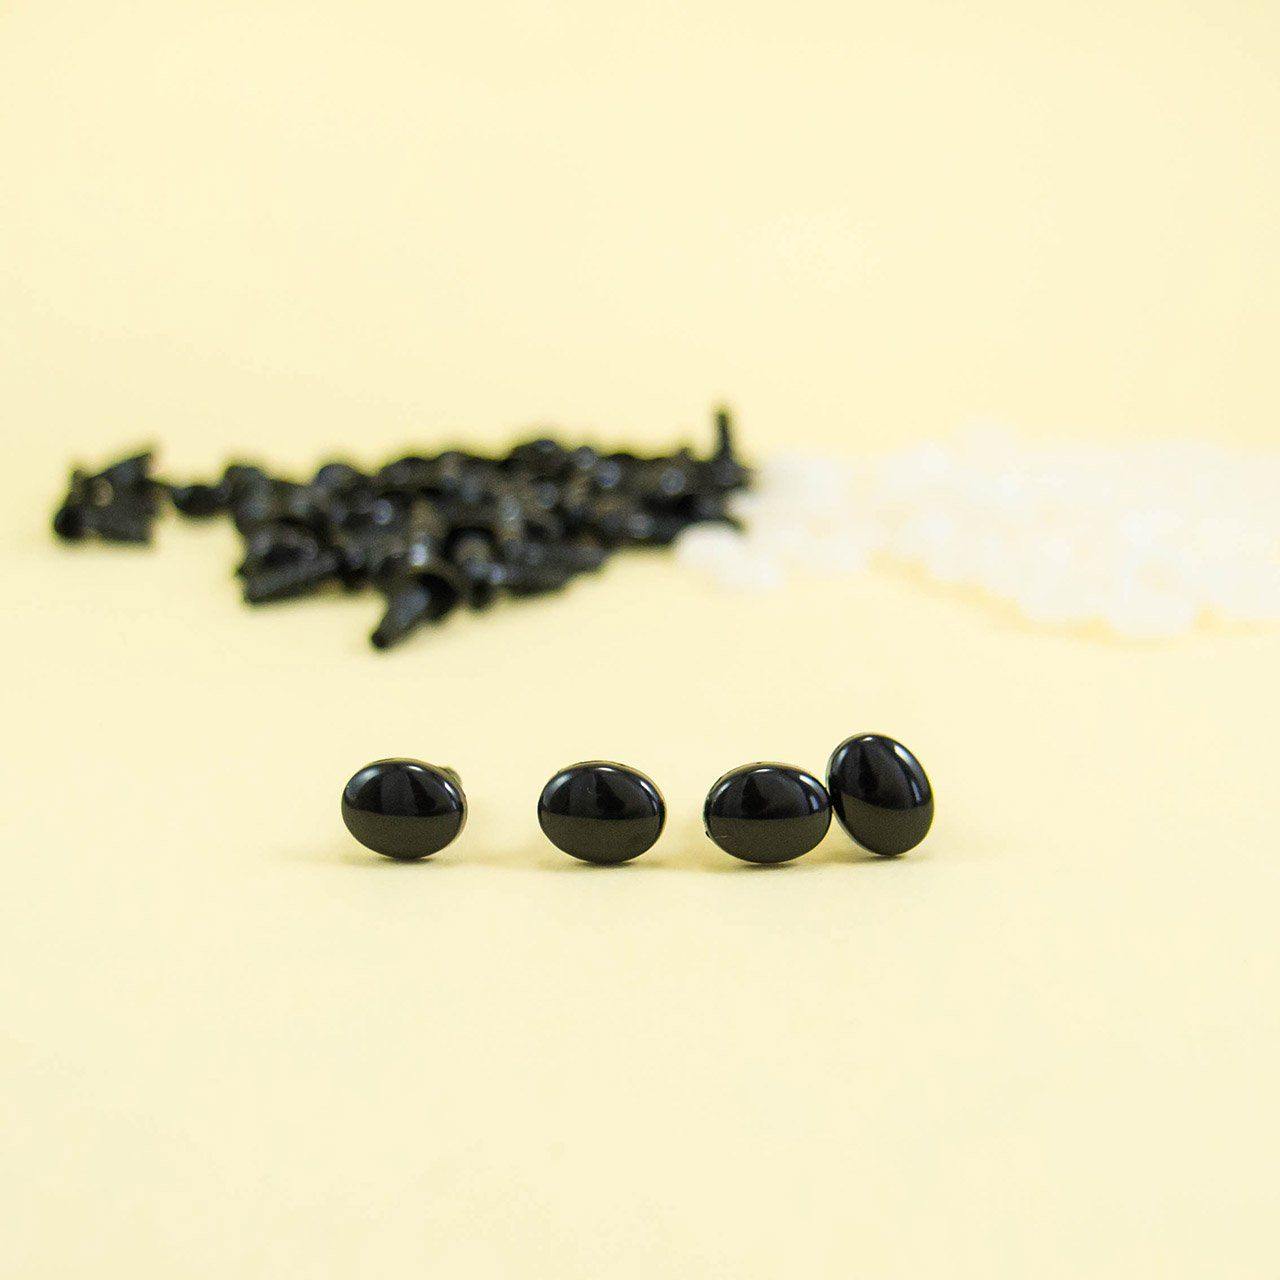 Black Oval Safety Eyes/ Noses for Amigurumi - available in 4 sizes